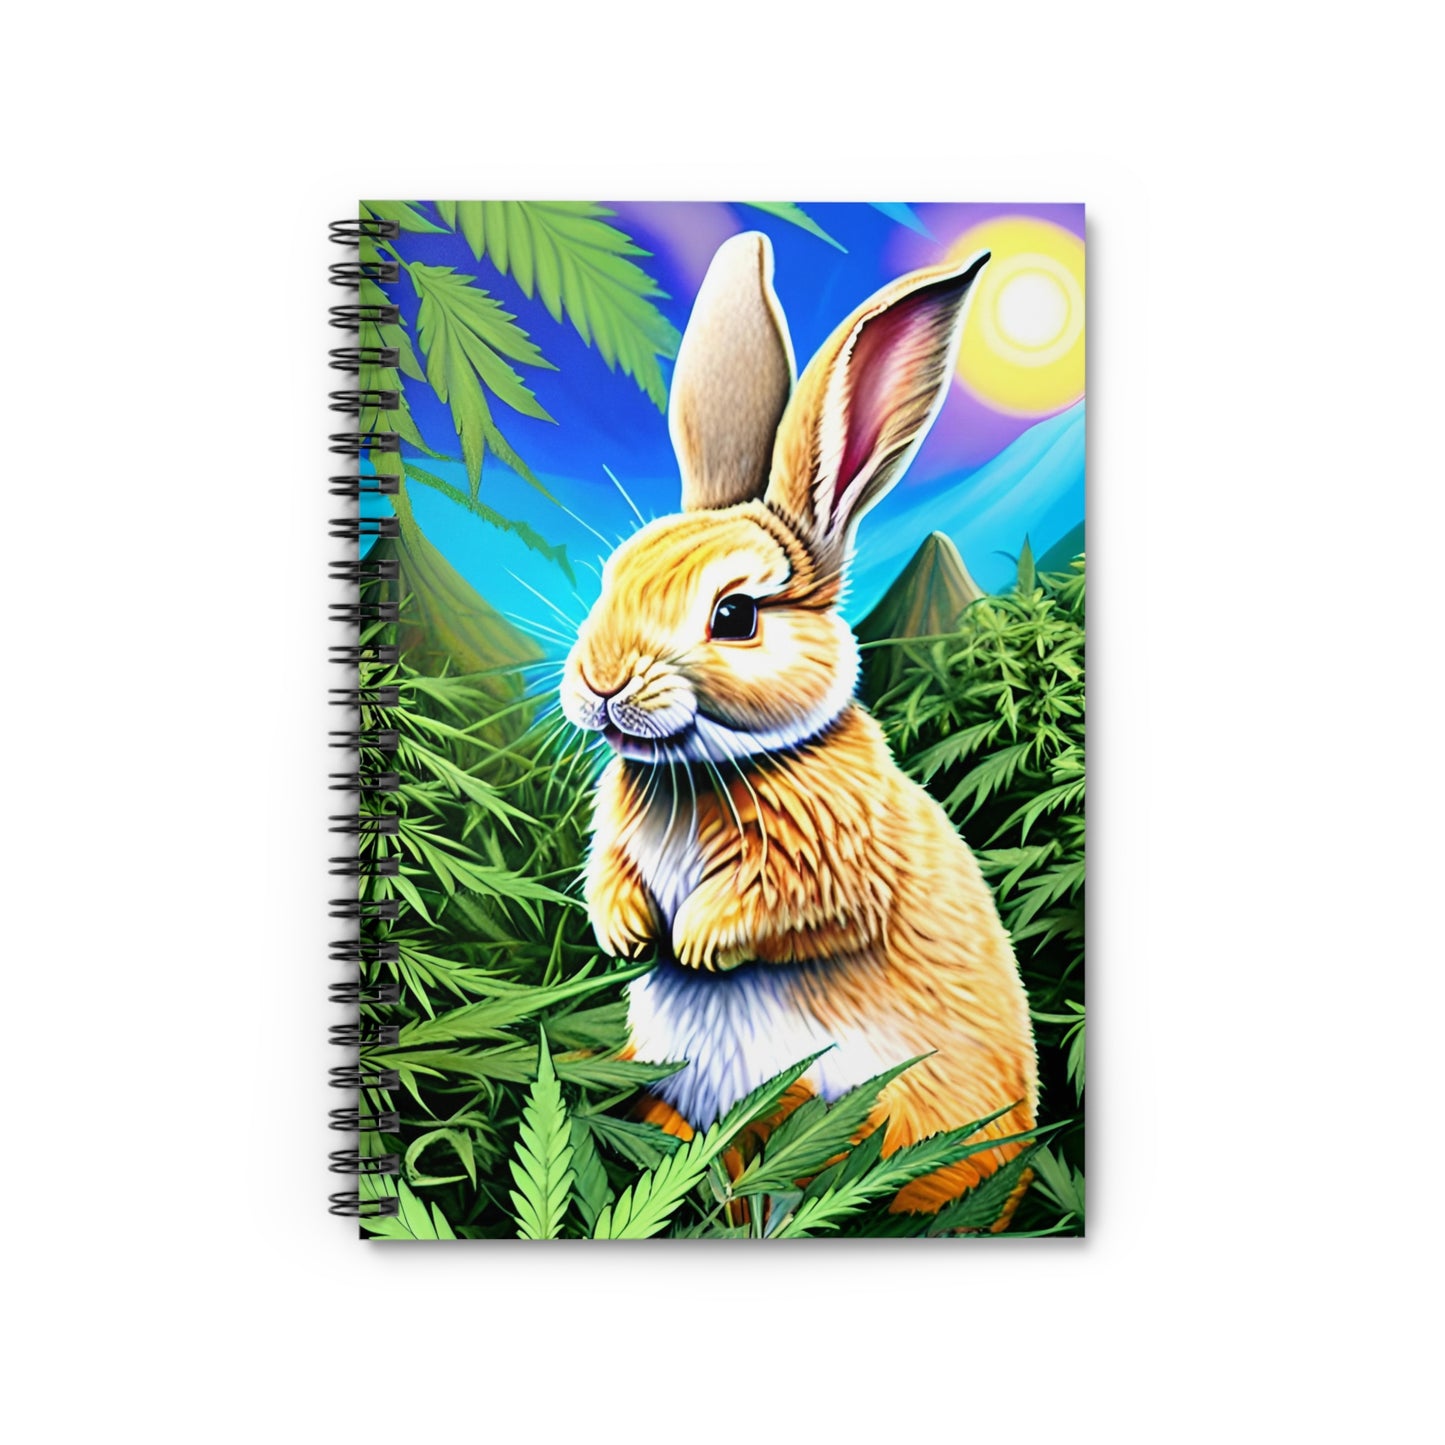 Cannabis Bunny Field Notebook No. 1 -  Perfect for Creative Notes, Sketches, and 420 Weed Project Tracking - 118 Pages Spiral Bound